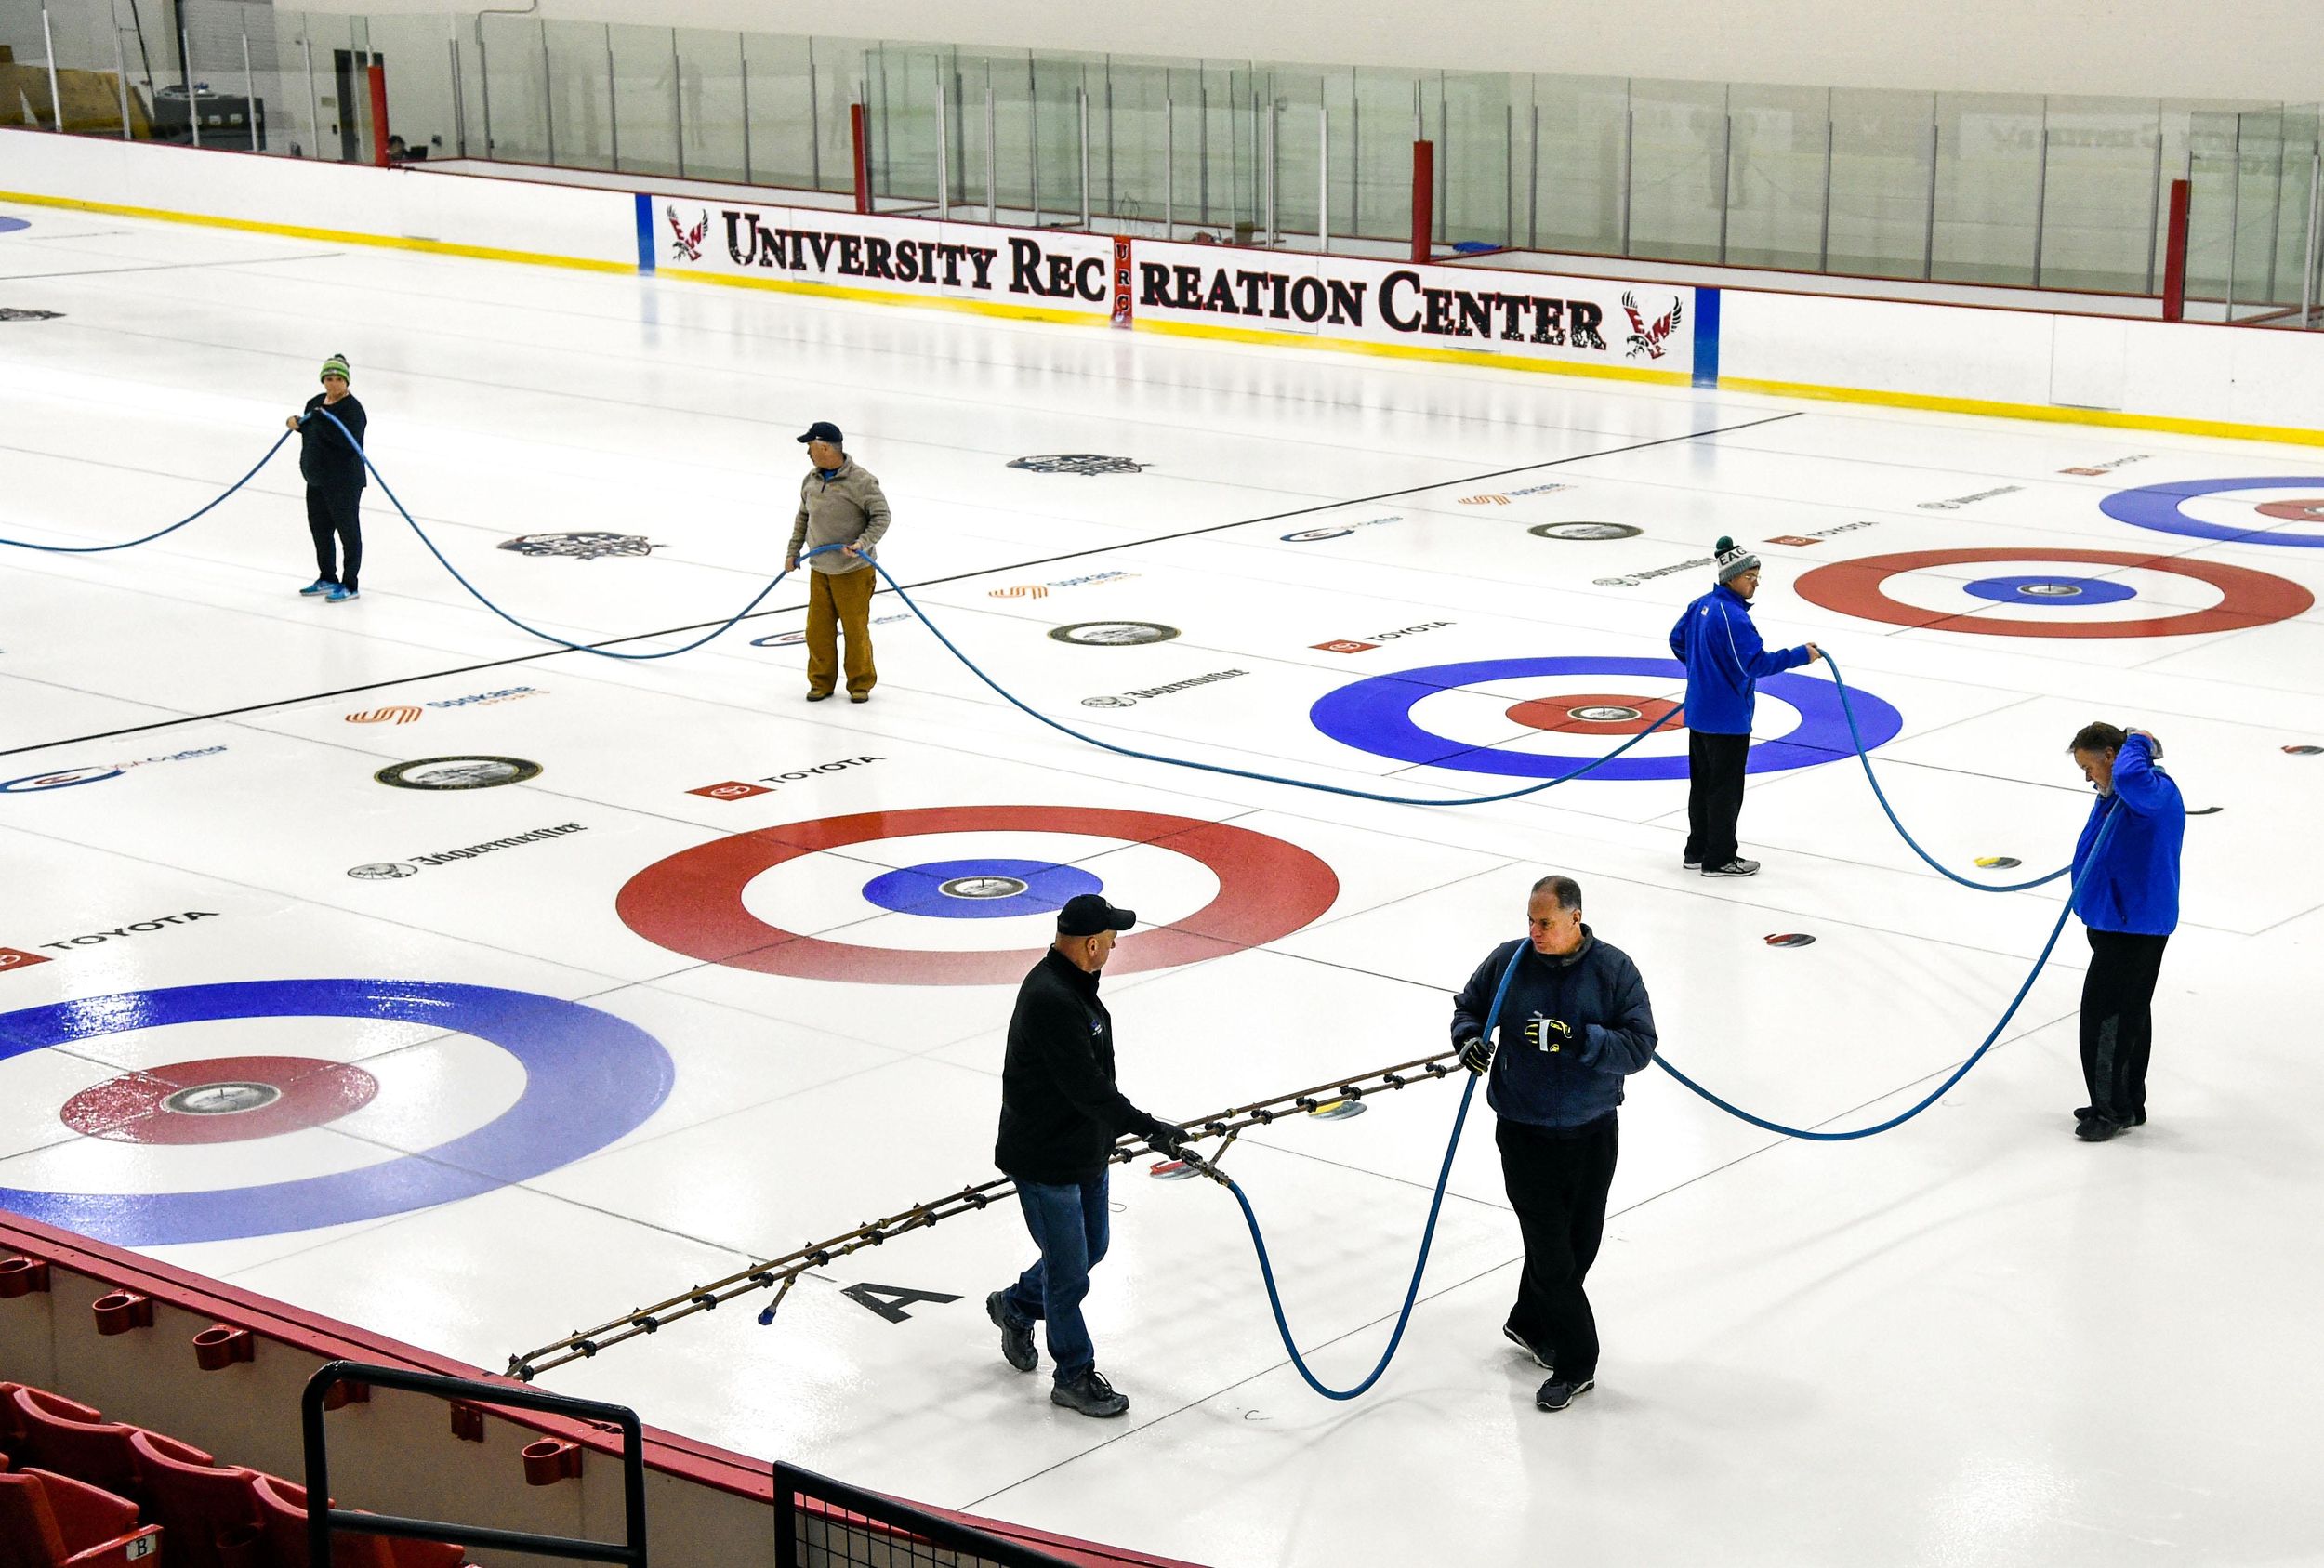 Team behind ice preparation for USA Curling Nationals hopes their work